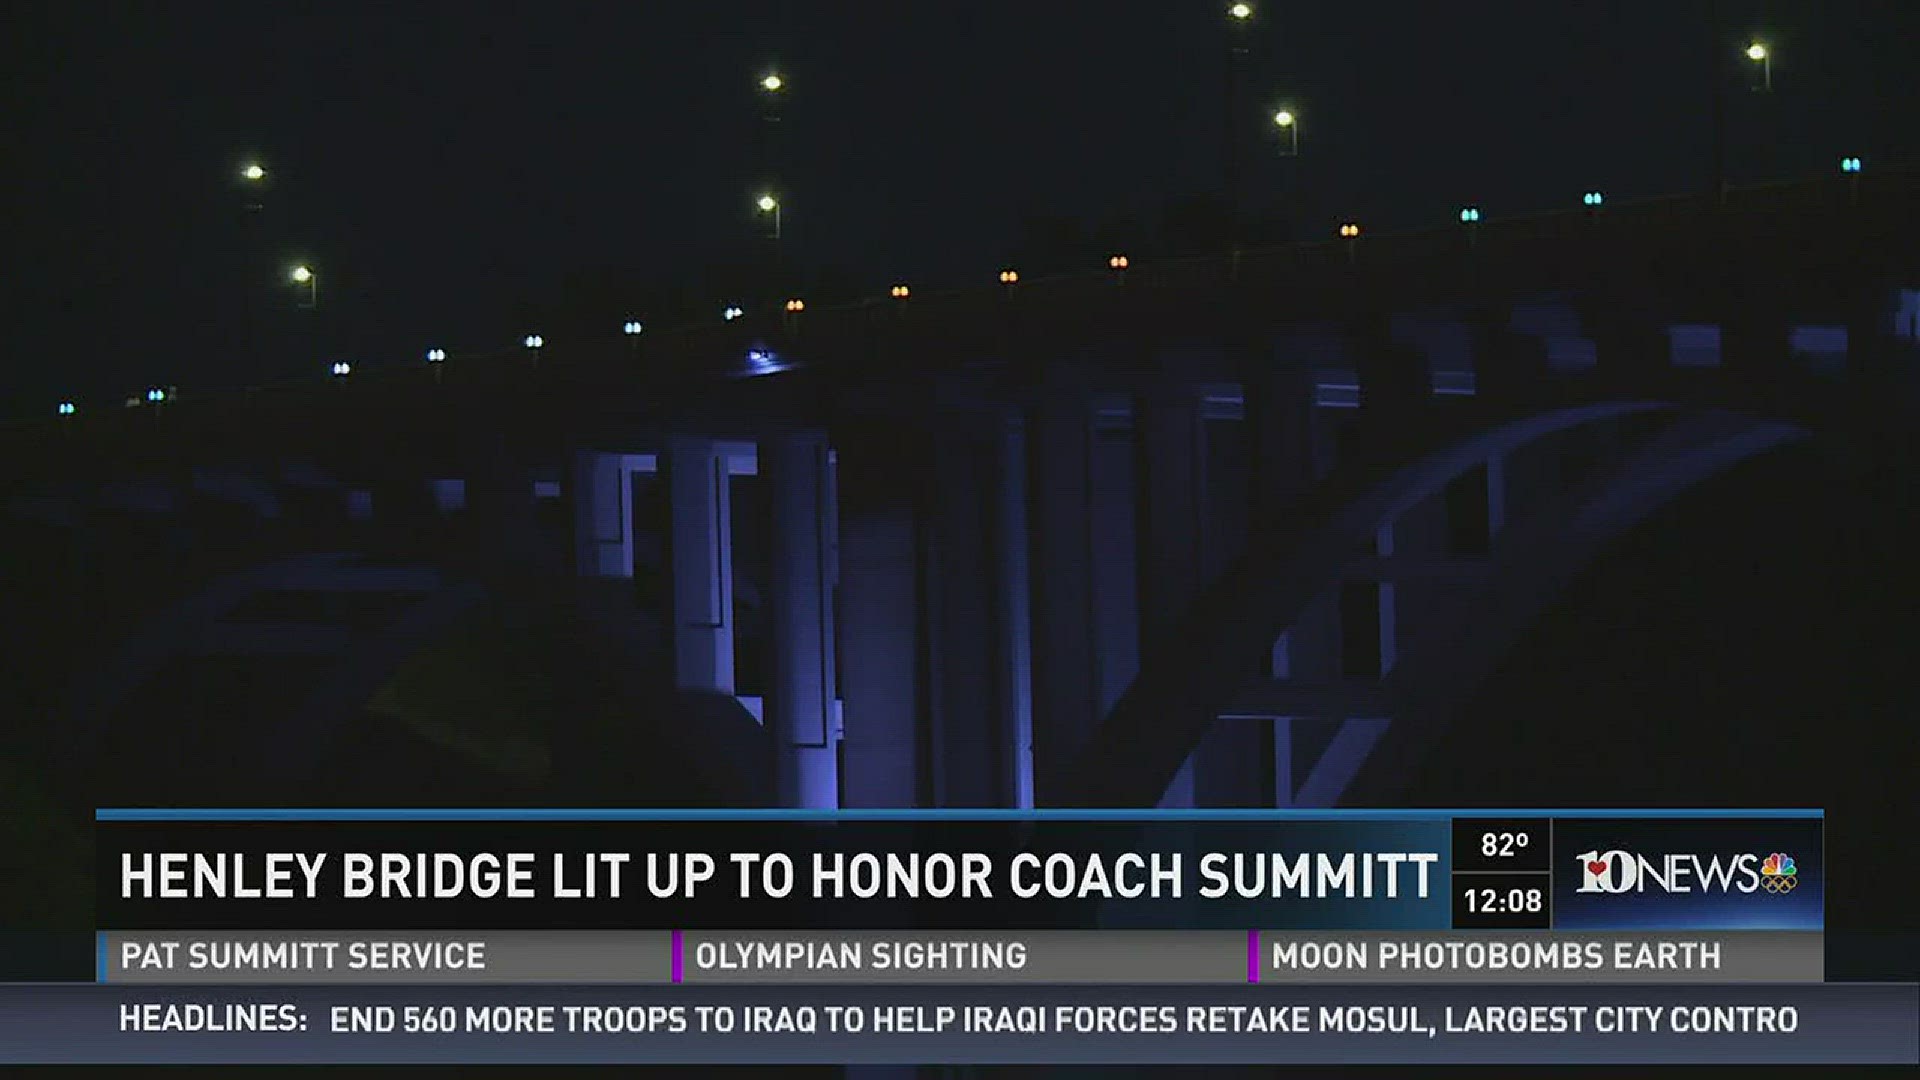 Knoxville city officials will light the Henley Bridge orange to honor the late Pat Summitt.